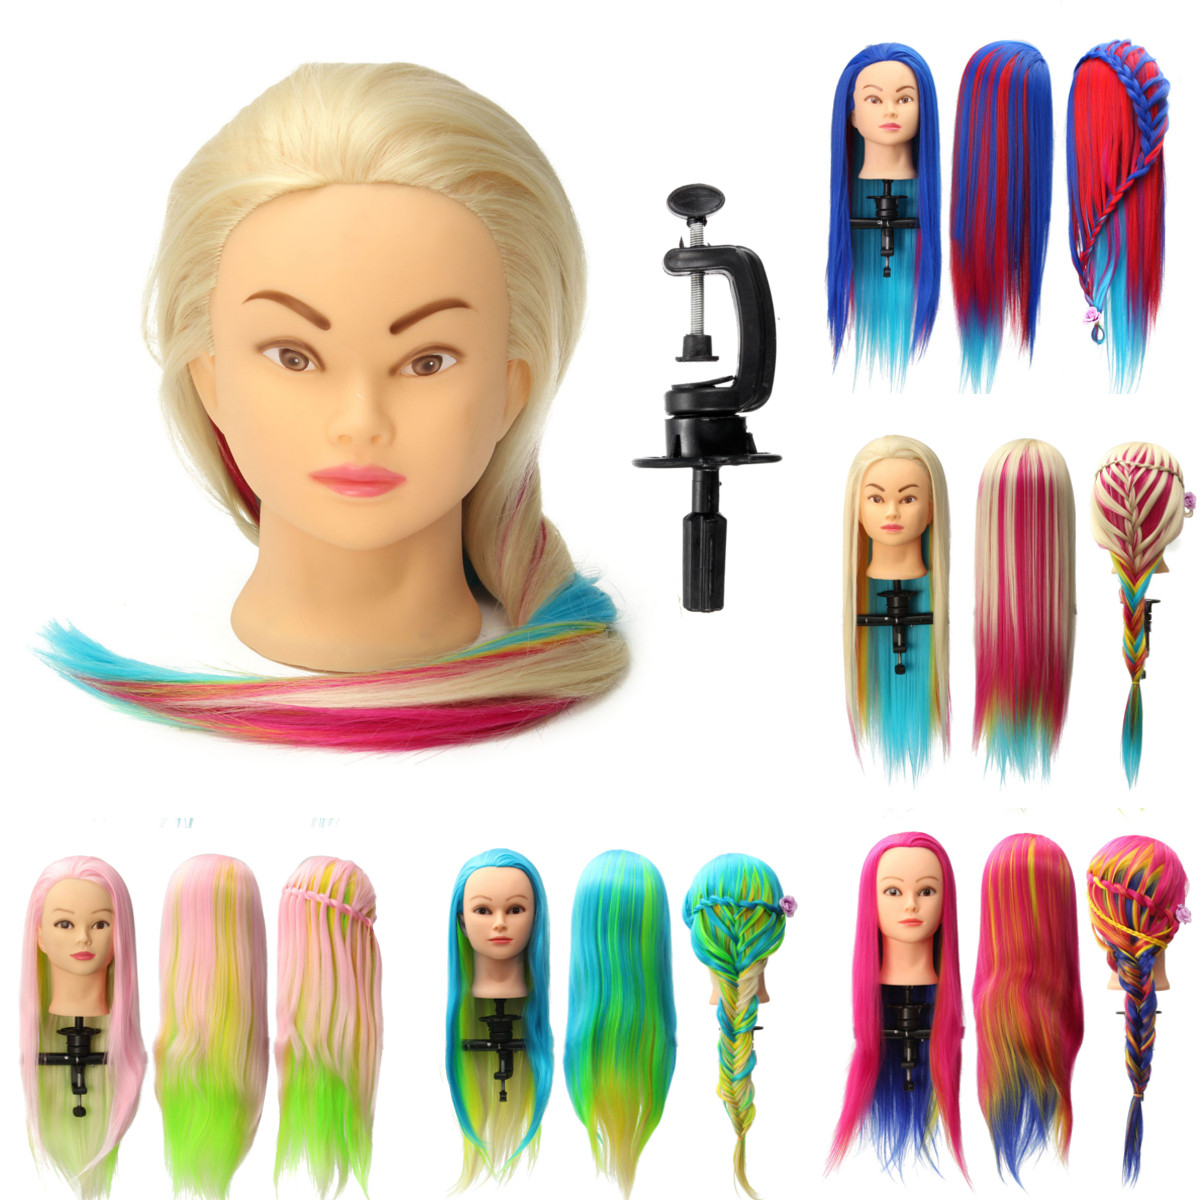 

8 Colors Salon Hairdressing Braiding Practice Mannequin Hair Training Head Models With Clamp Holder